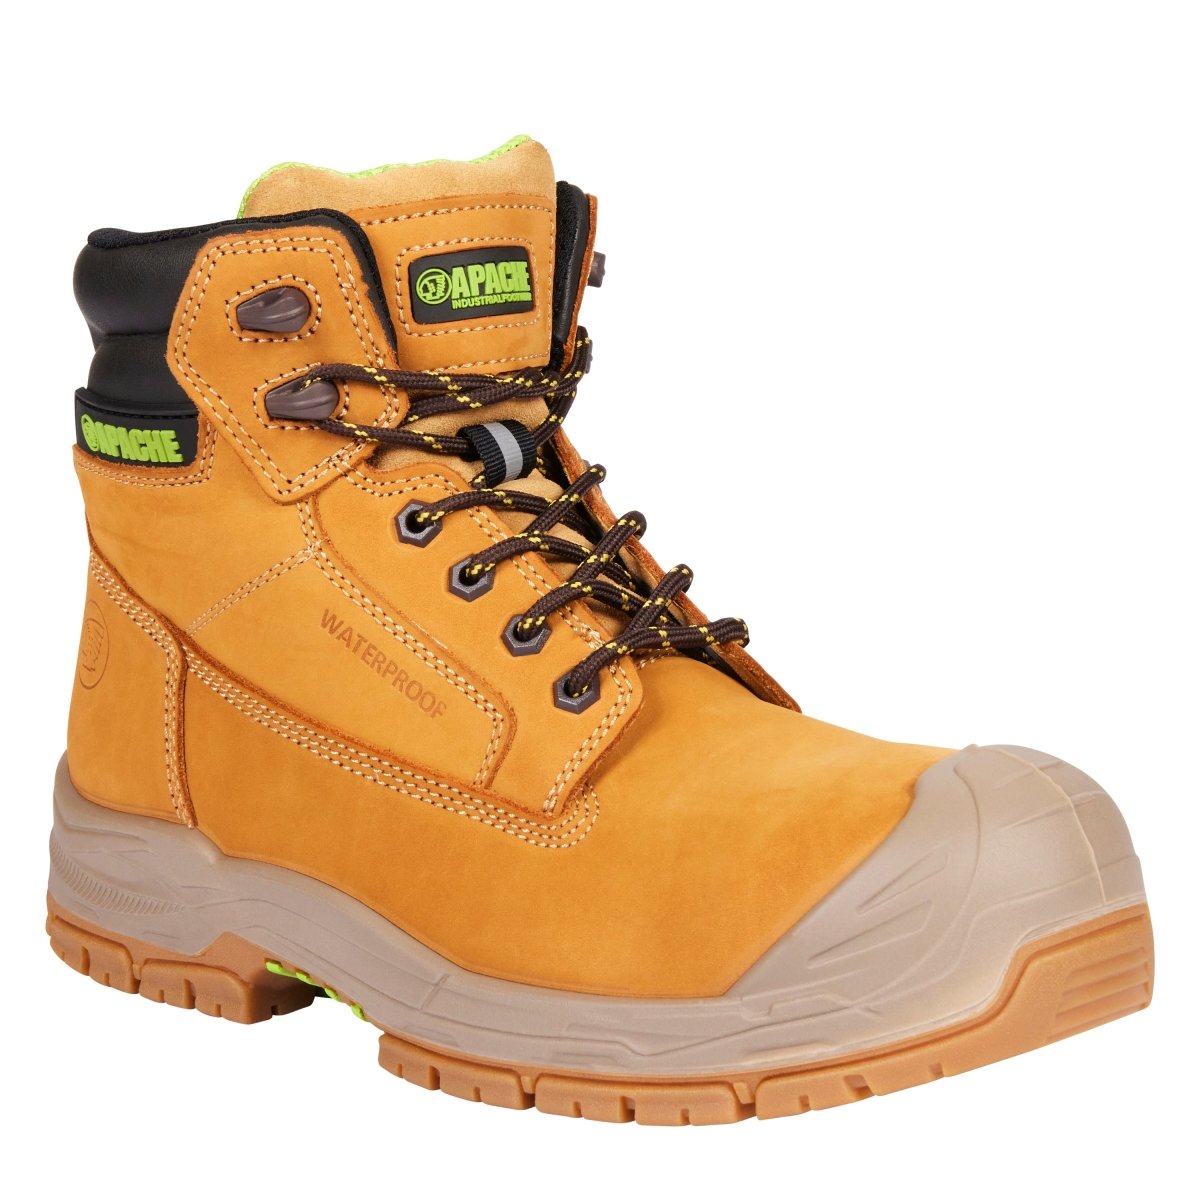 Apache Thompson Waterproof Safety Boot - Shoe Store Direct